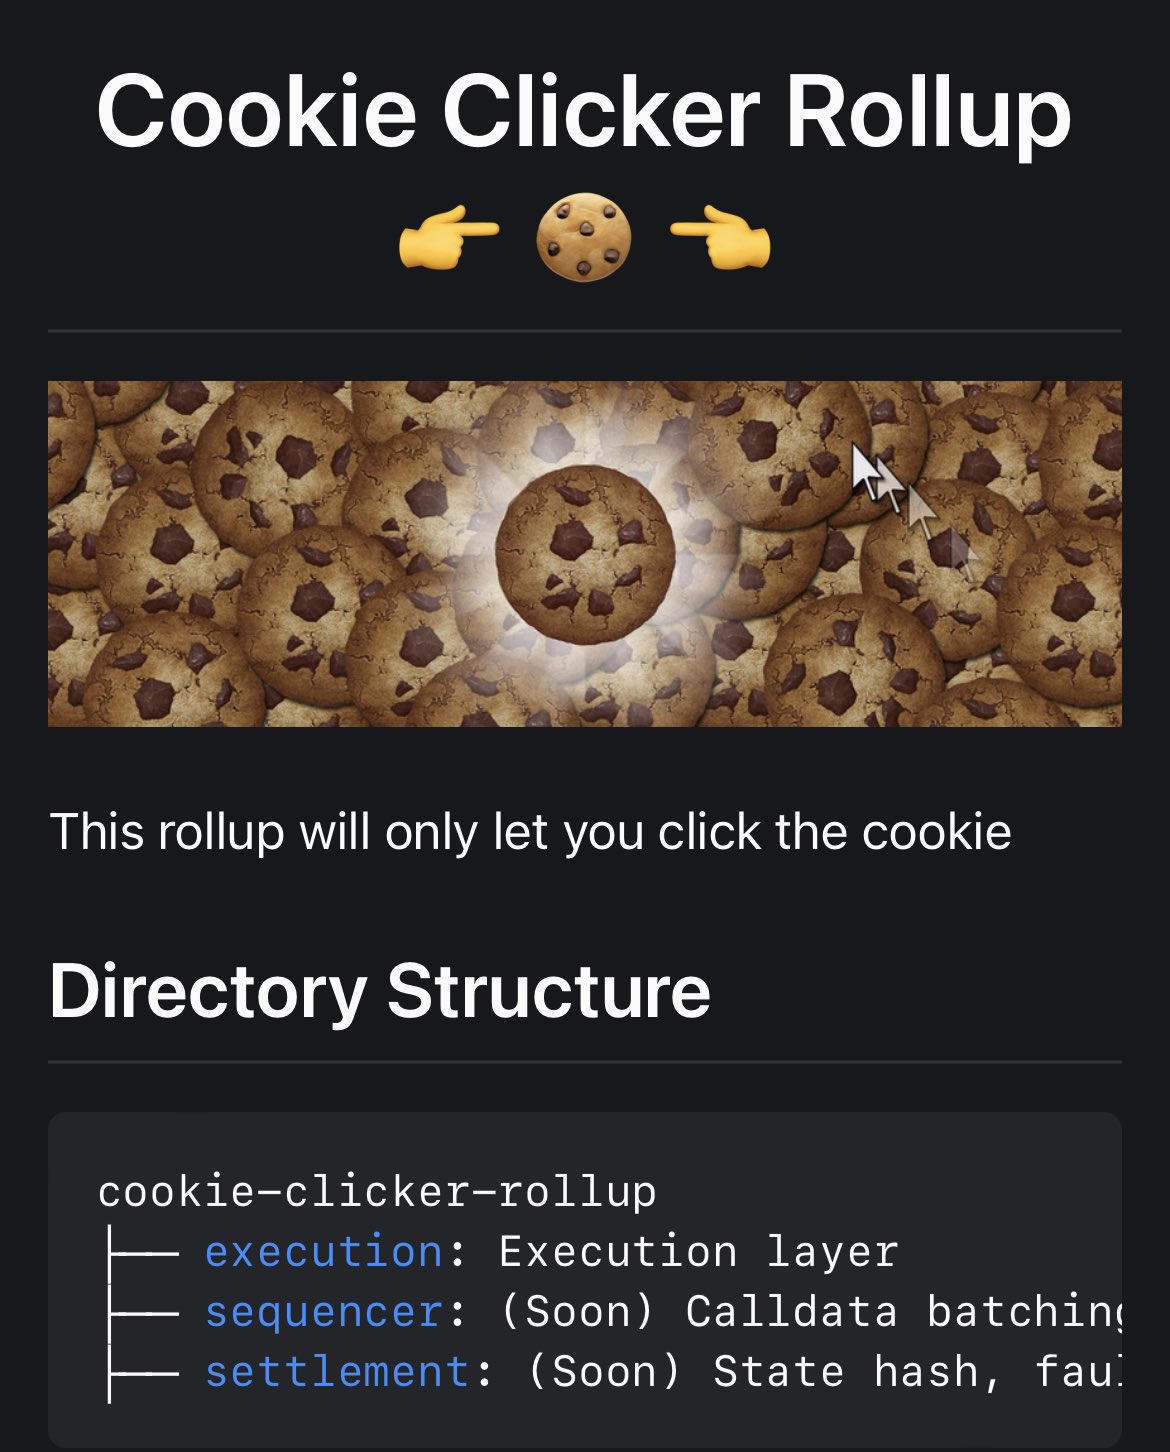 How To hack cookie clicker